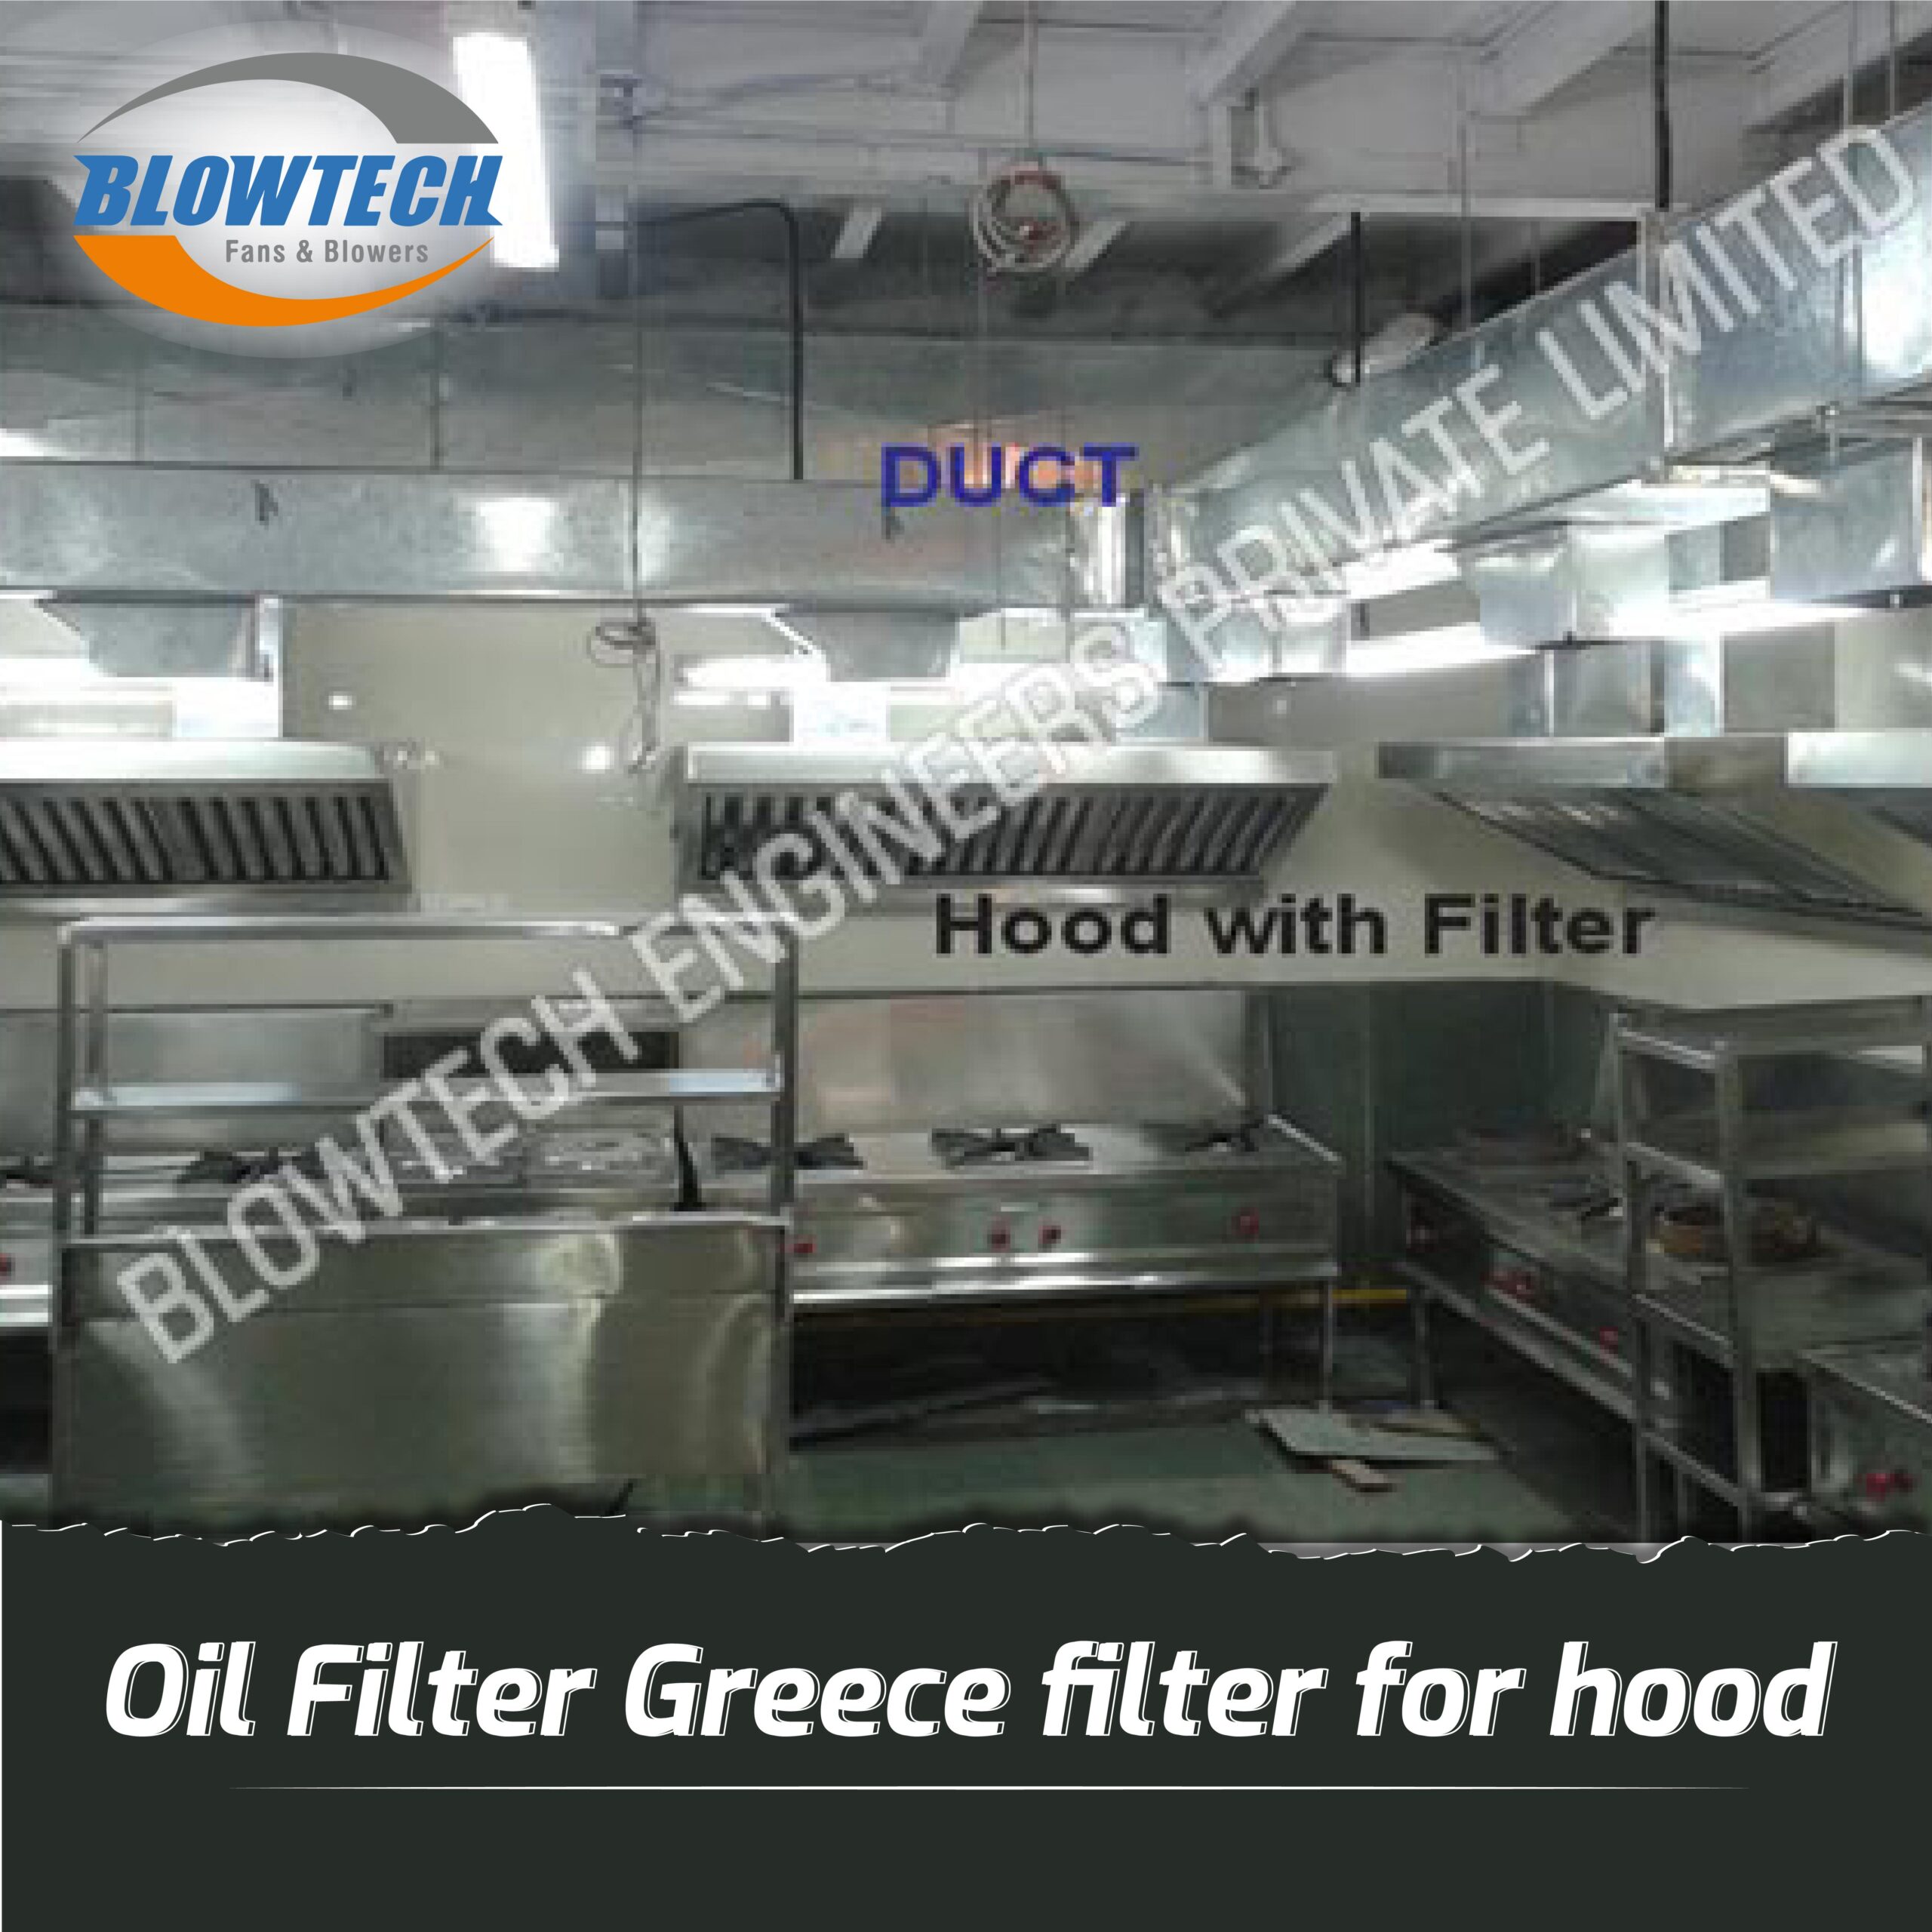 Oil Filter/ Grease filter for hood  manufacturer, supplier and exporter in Mumbai, India